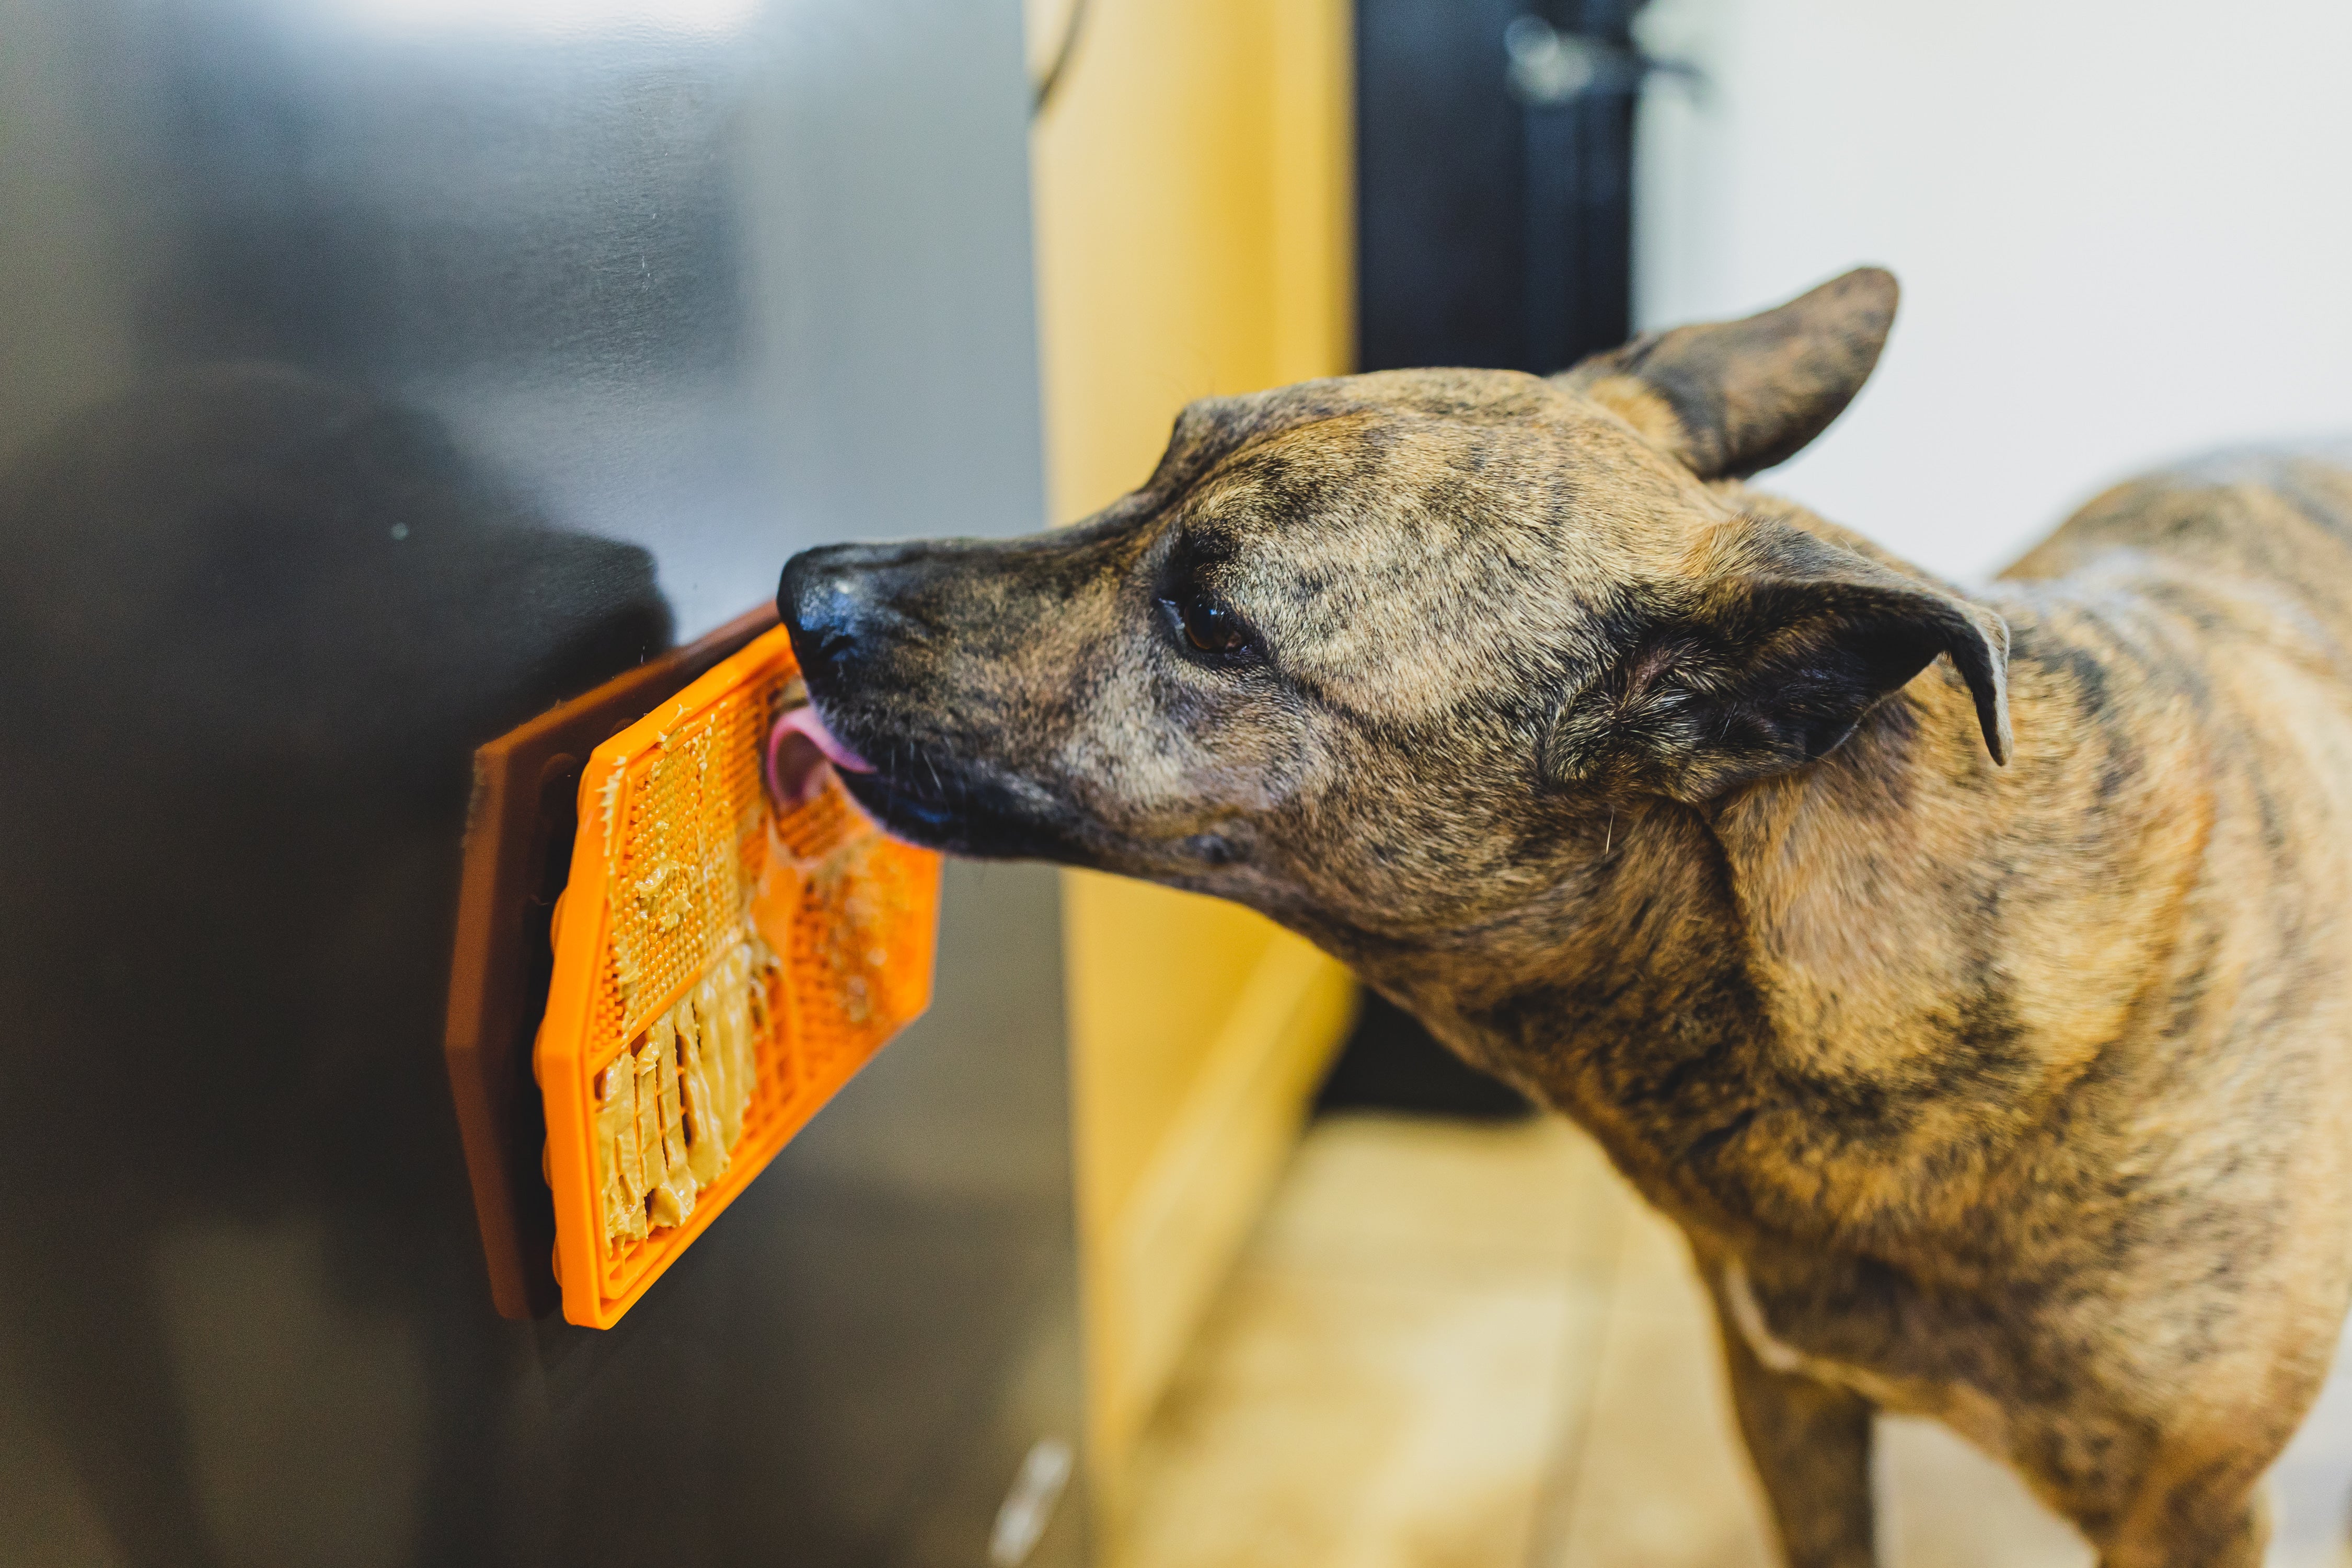 Brindle dog licking orange Mighty Paw Lick Pad suctioned on to front of oven.